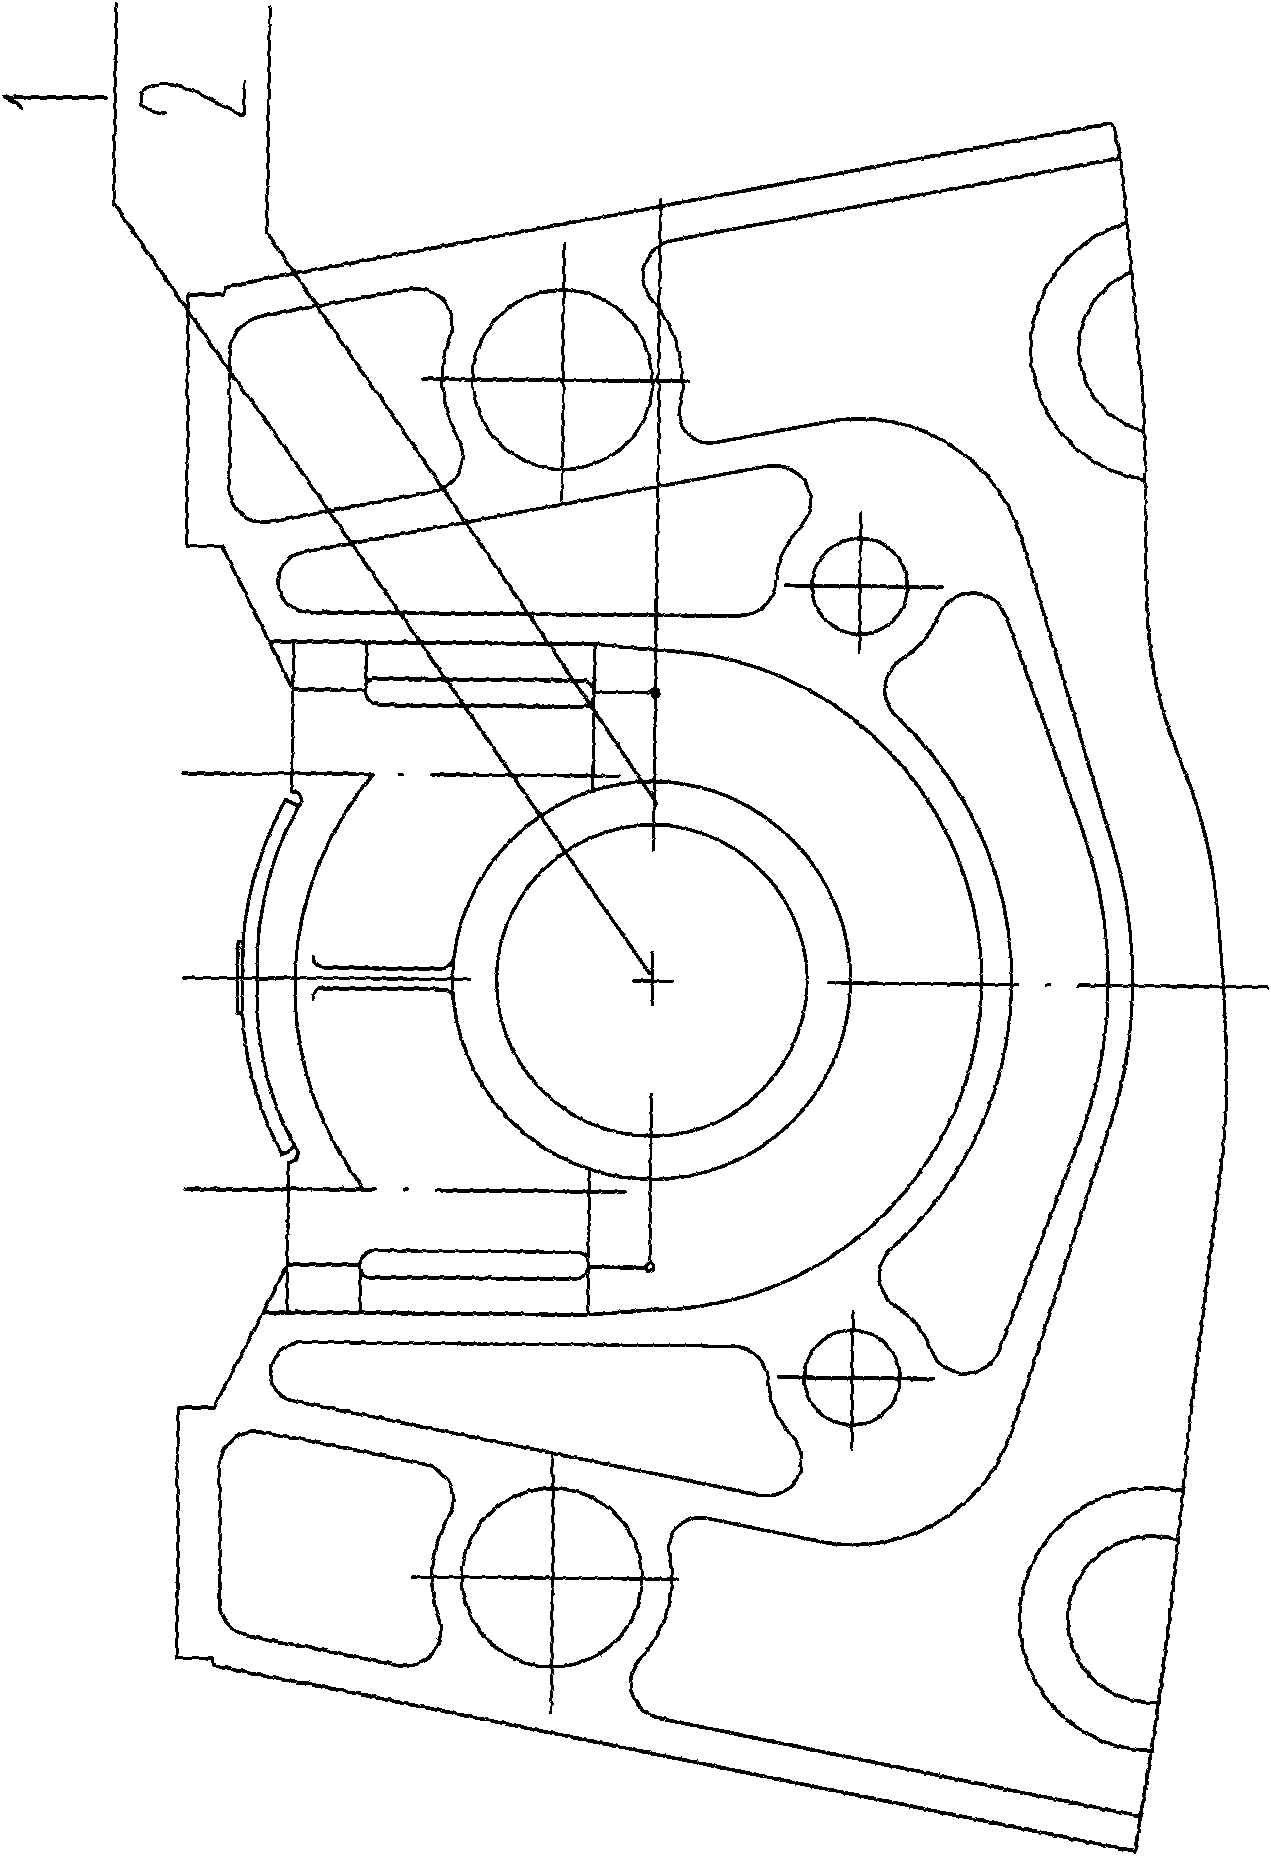 Process method for overhauling main bearing hole of diesel engine cylinder block